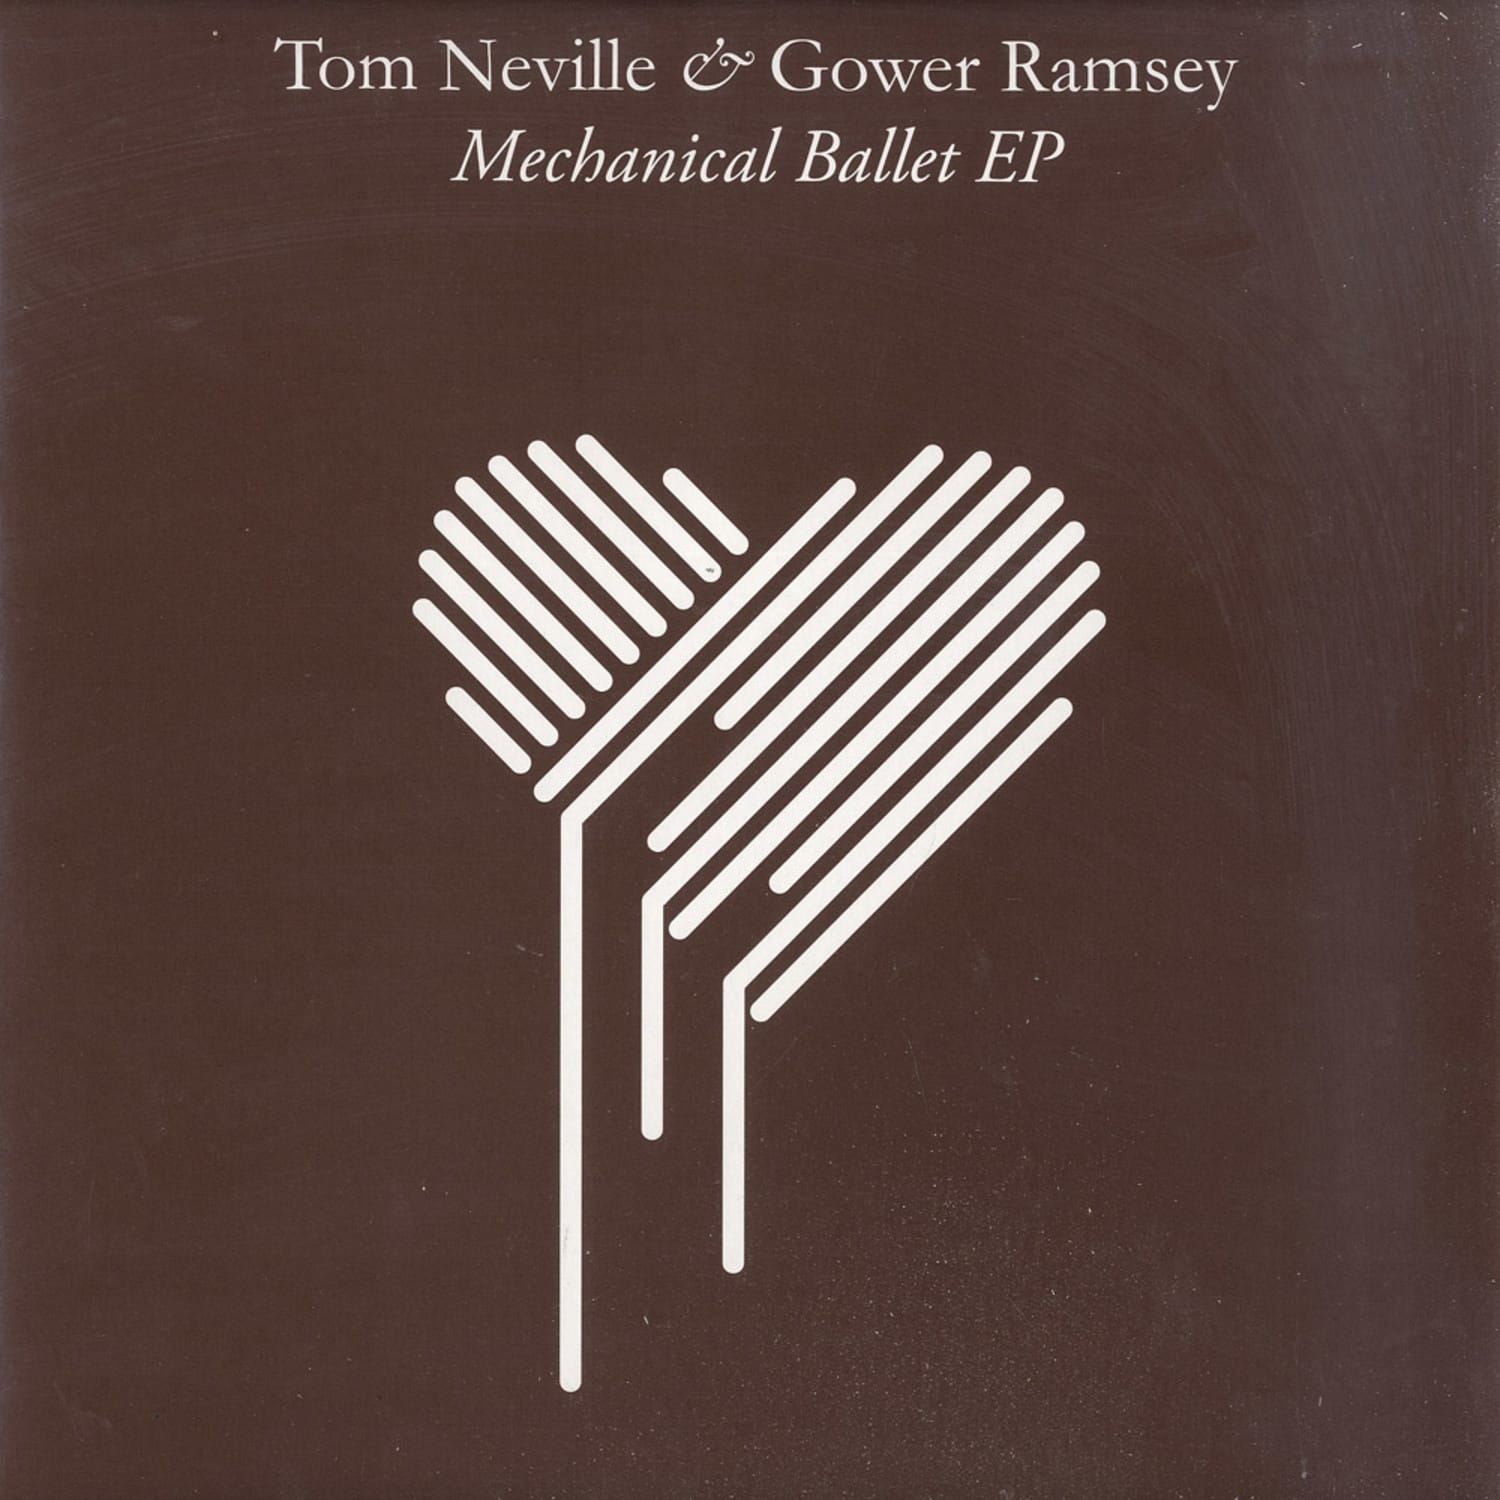 Tom Neville and Gower Ramsey - DYNAMICS OF FLIGHT